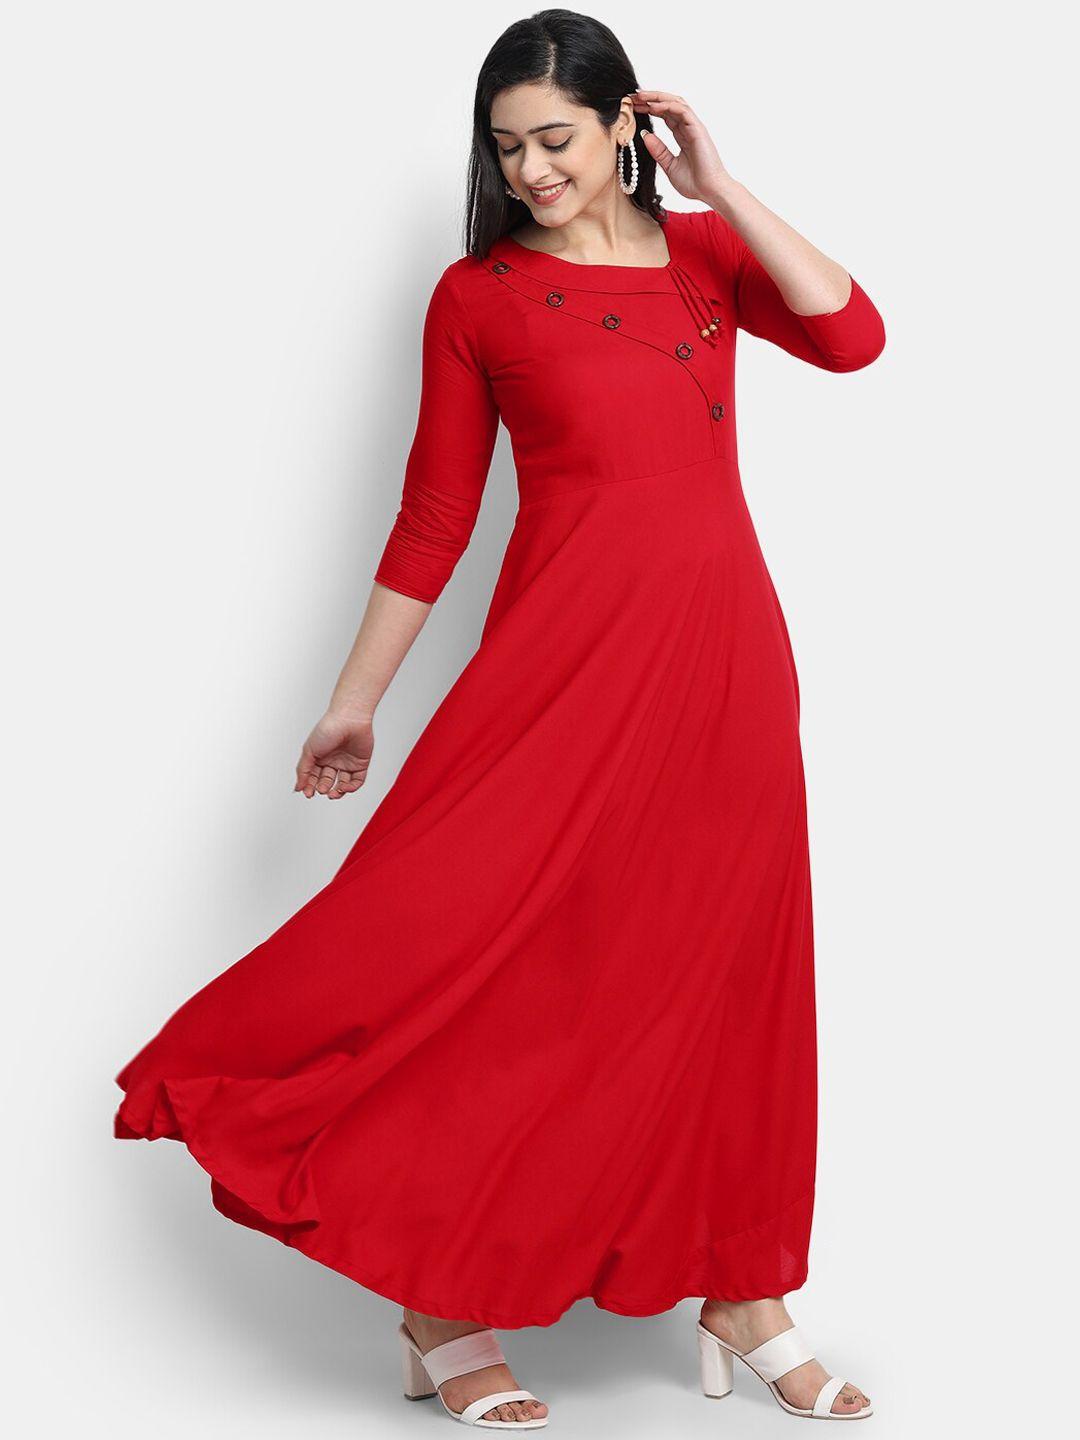 globon-impex-women-red-solid-maxi-dress